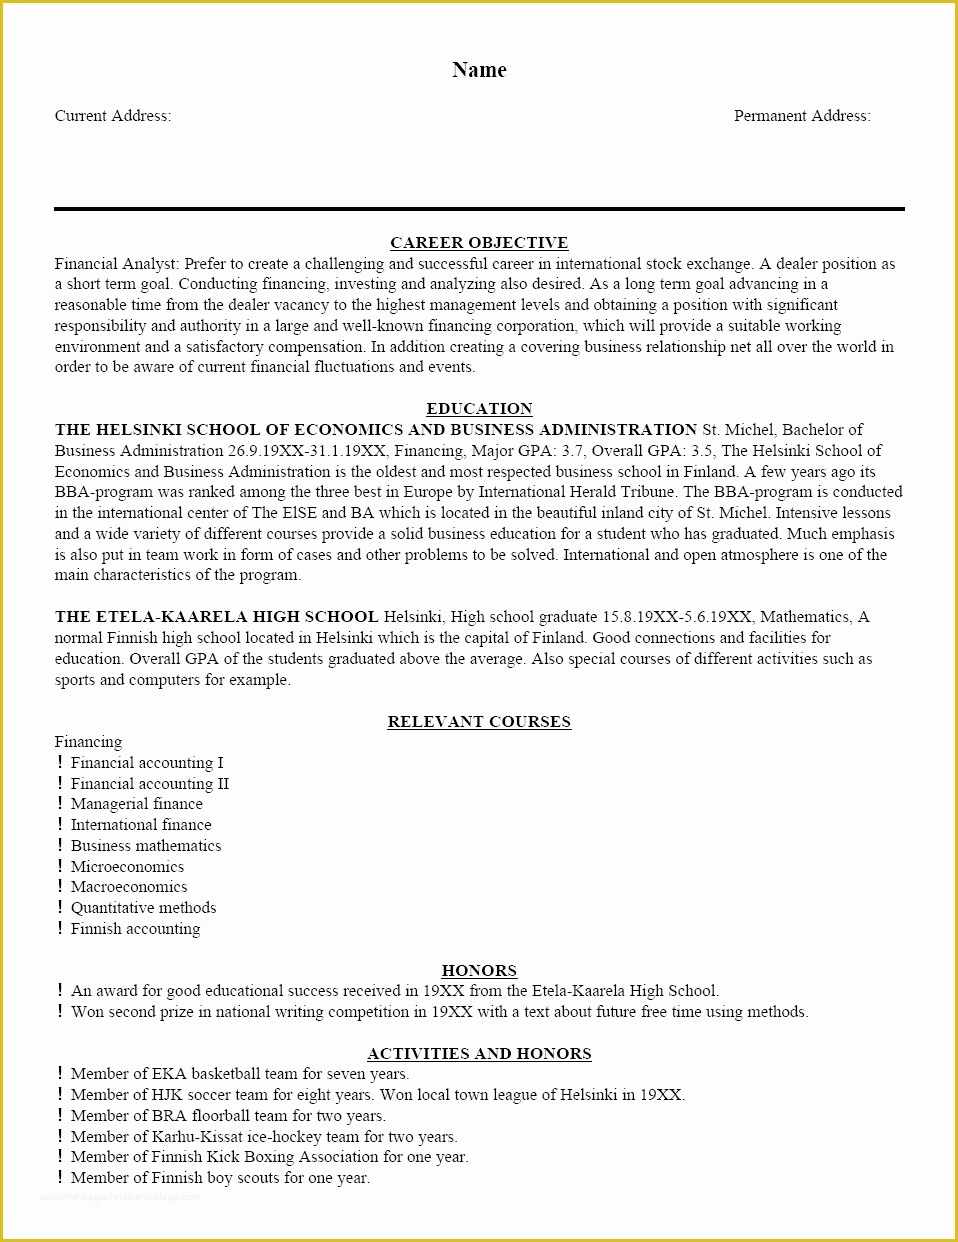 Free Resume and Cover Letter Templates Of Free Sample Resume Template Cover Letter and Resume